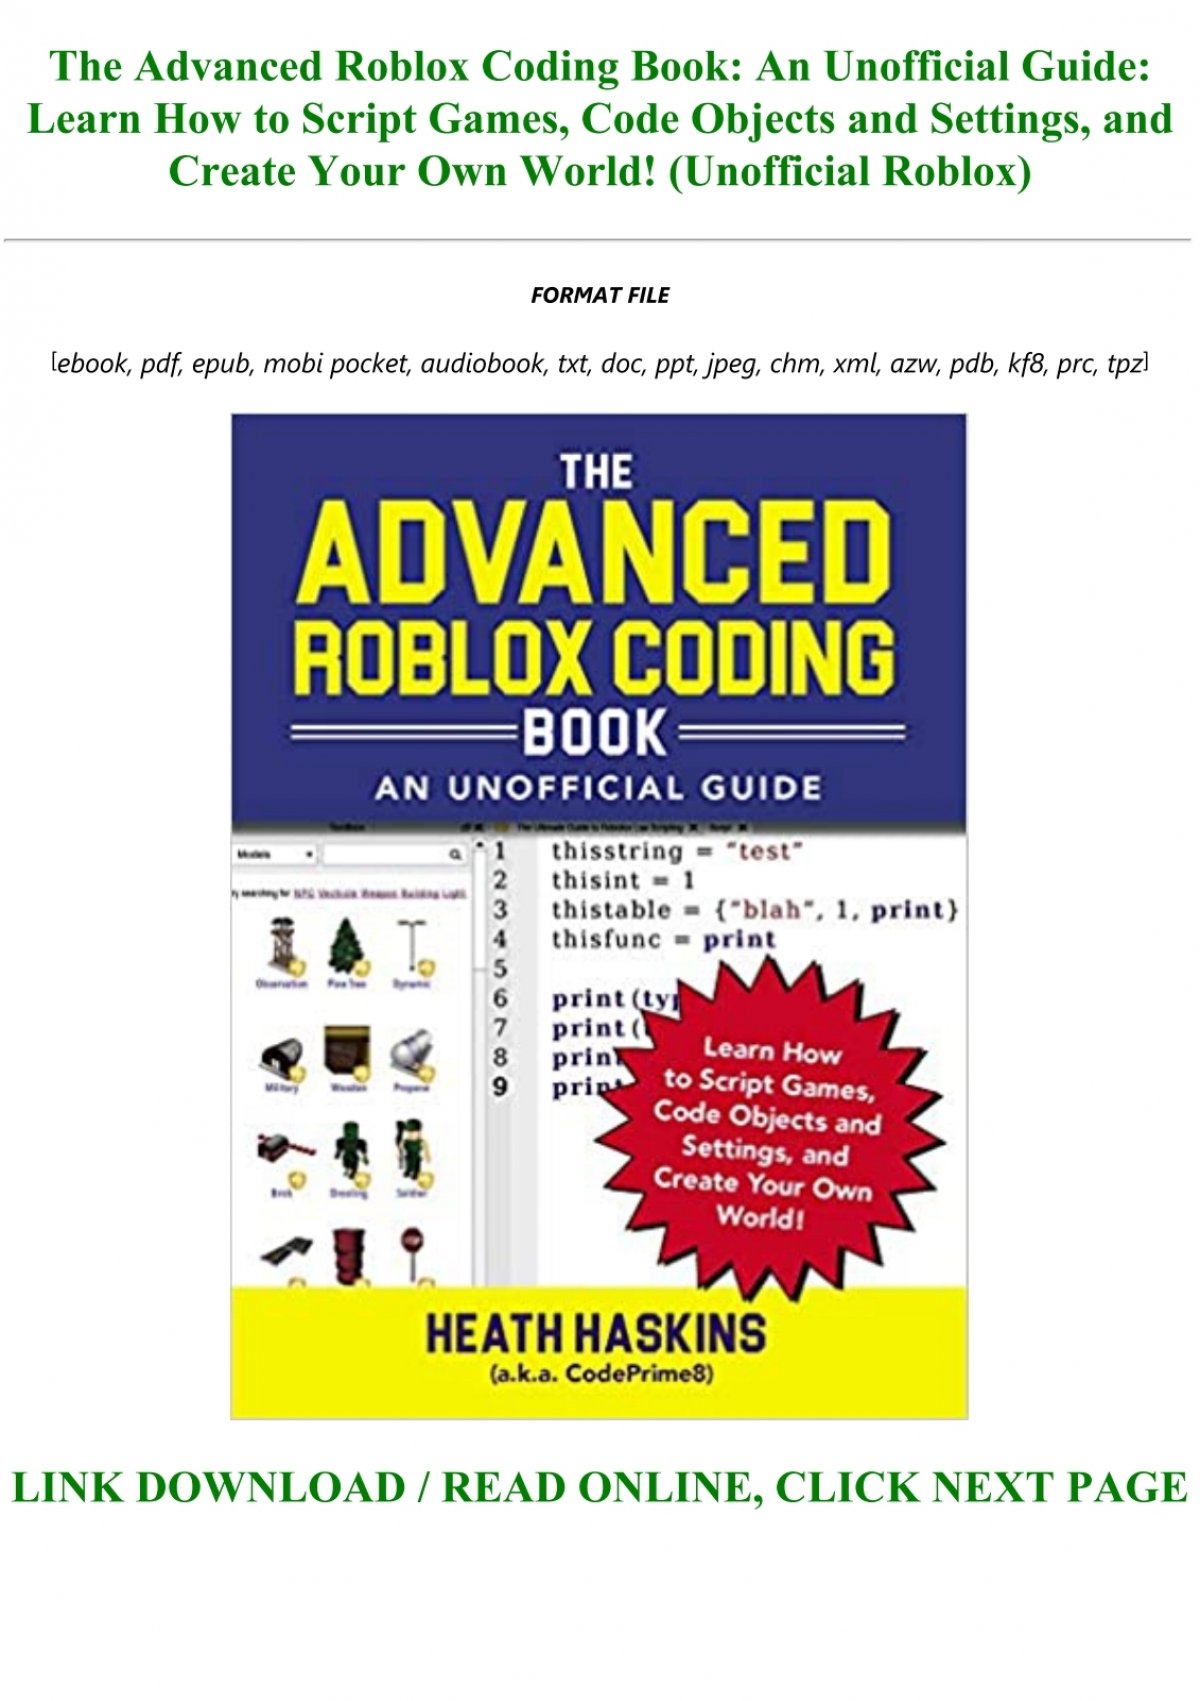 Download E B O O K The Advanced Roblox Coding Book An Unofficial Guide Learn How To Script Games Code Objects And Settings And Create Your Own World Unofficial Roblox Full - the advanced roblox coding book an unofficial guide learn how to script games code objects and settings and create your own world by heath haskins paperback barnes noble